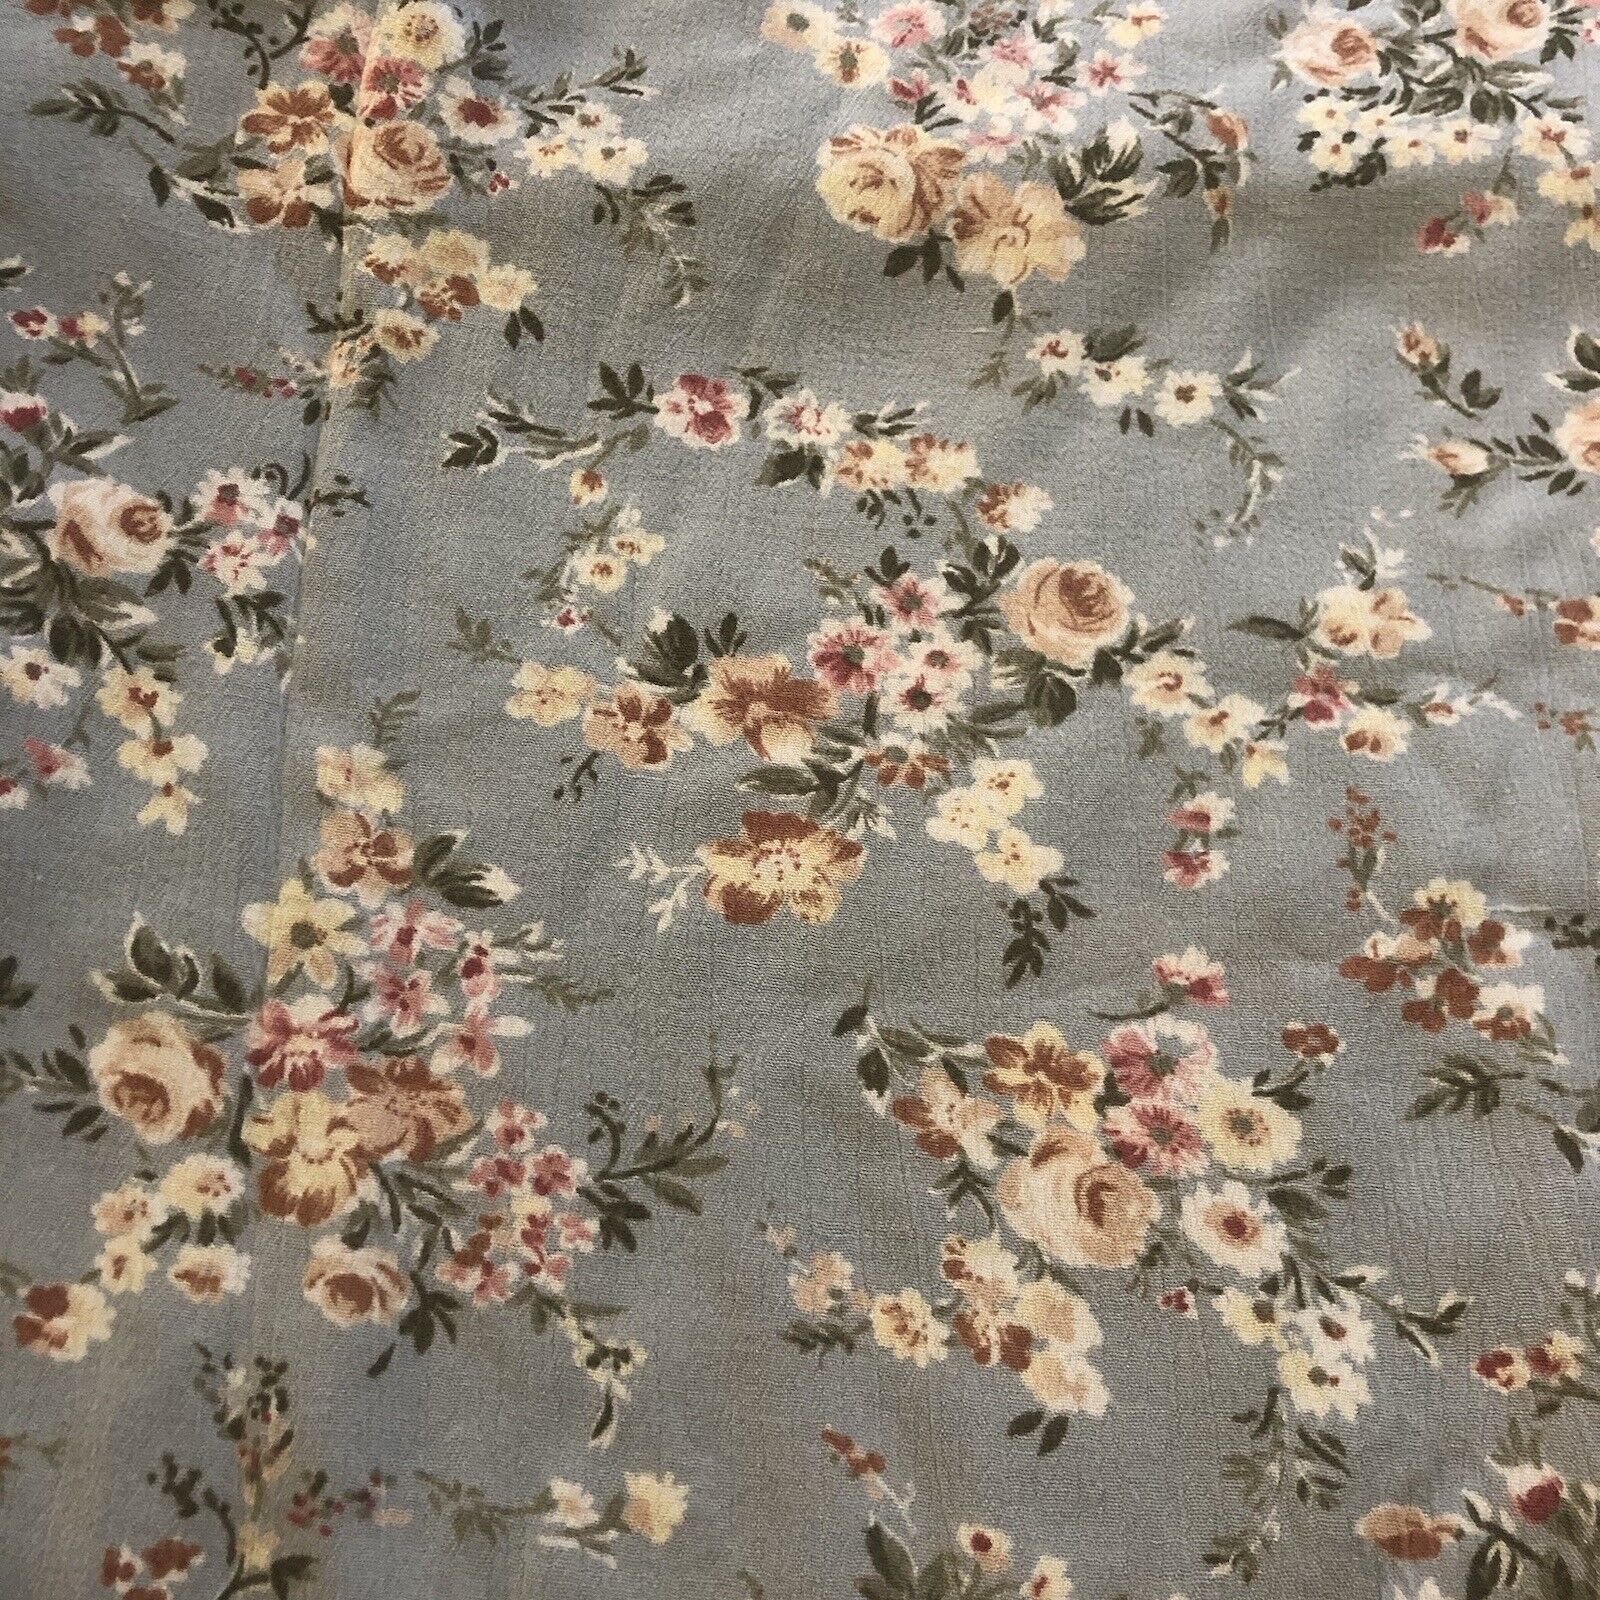 Vintage Fabric Roses Flowy Poly Blend Lightly Textured Grandma Core Beautiful